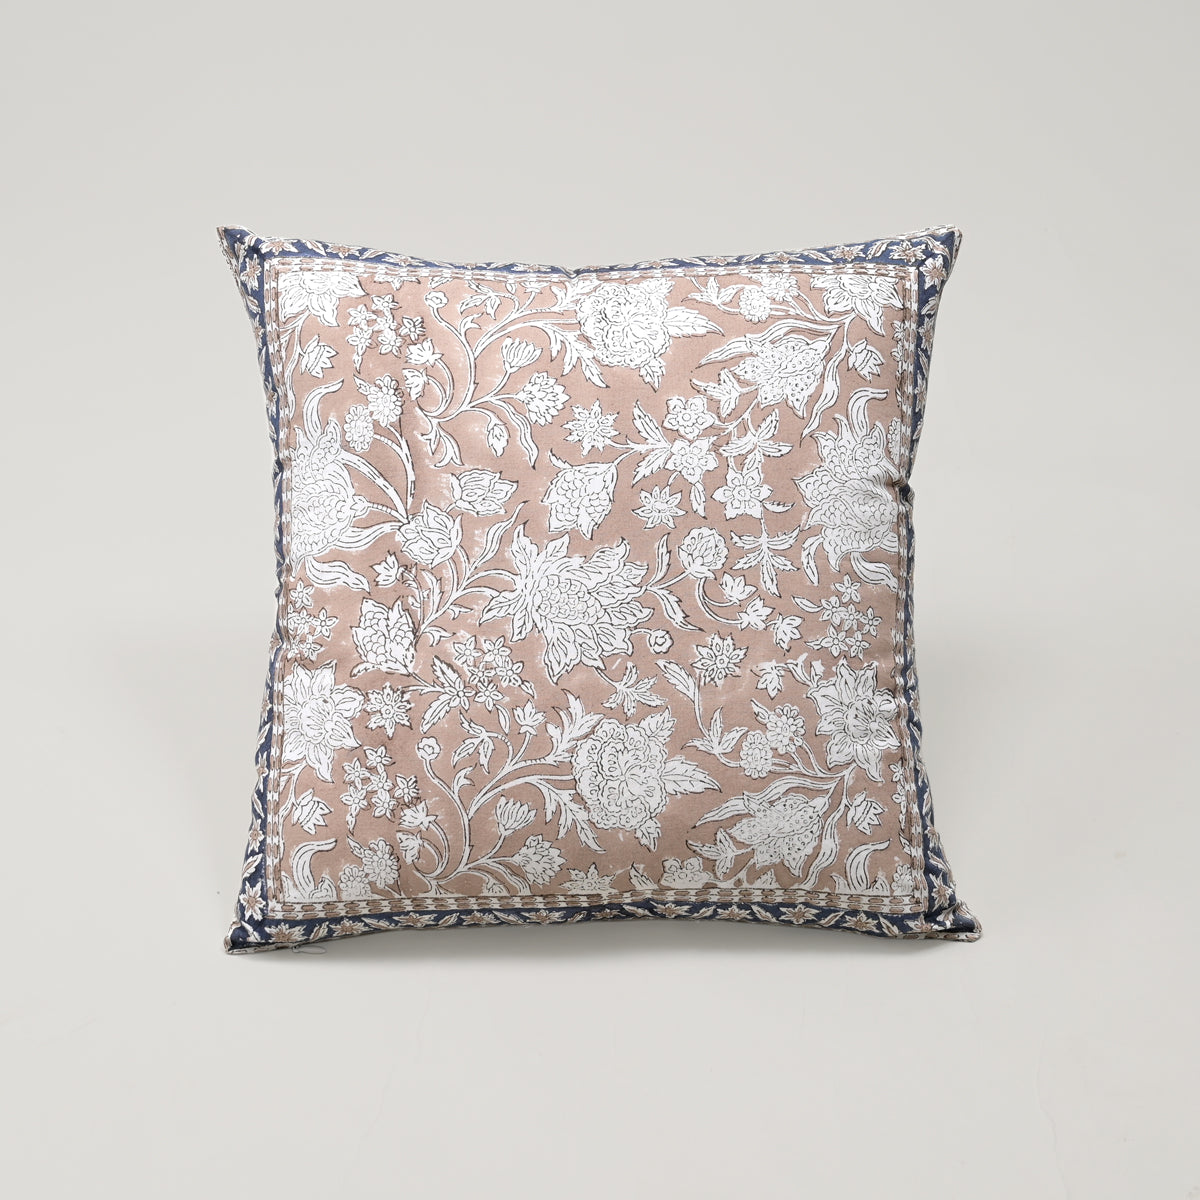 Florence Block Printed Cushion Cover, Set of 2